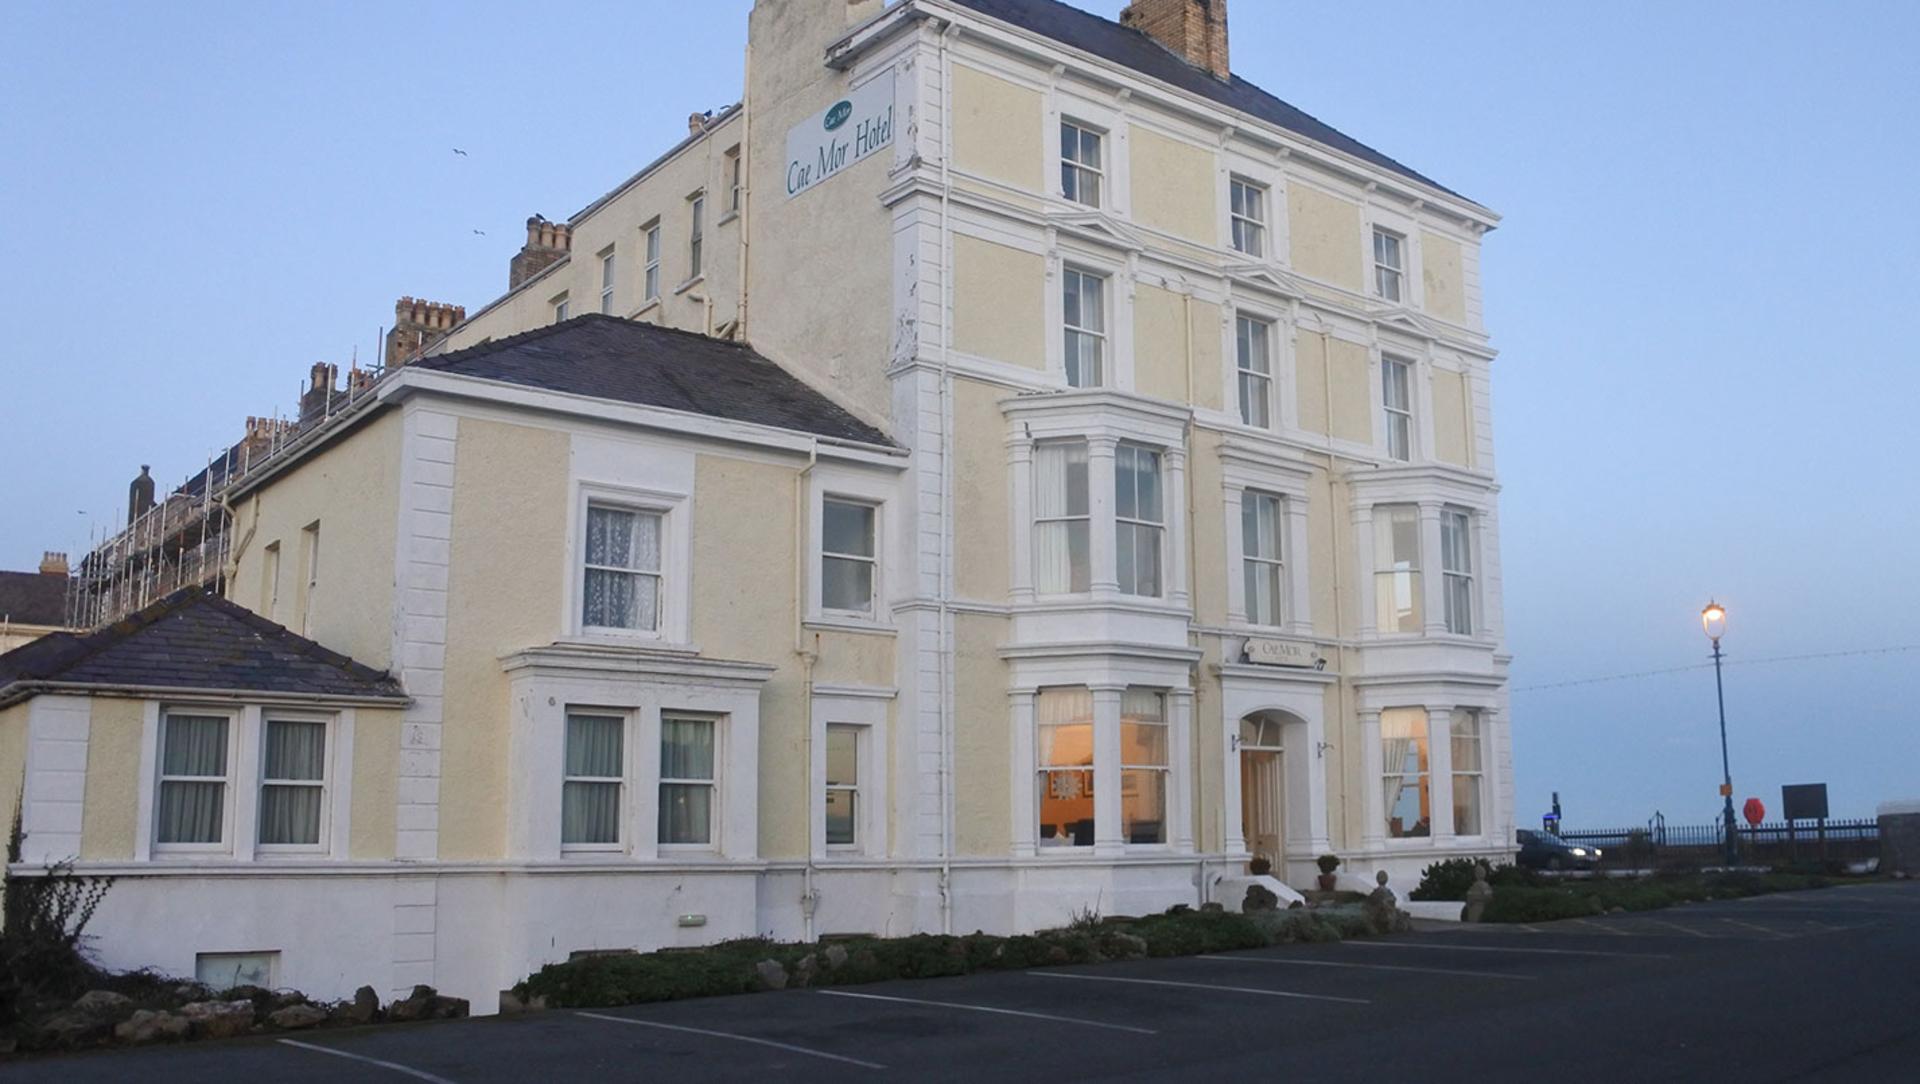 Llandudno seafront hotel brought to market for £1.25m